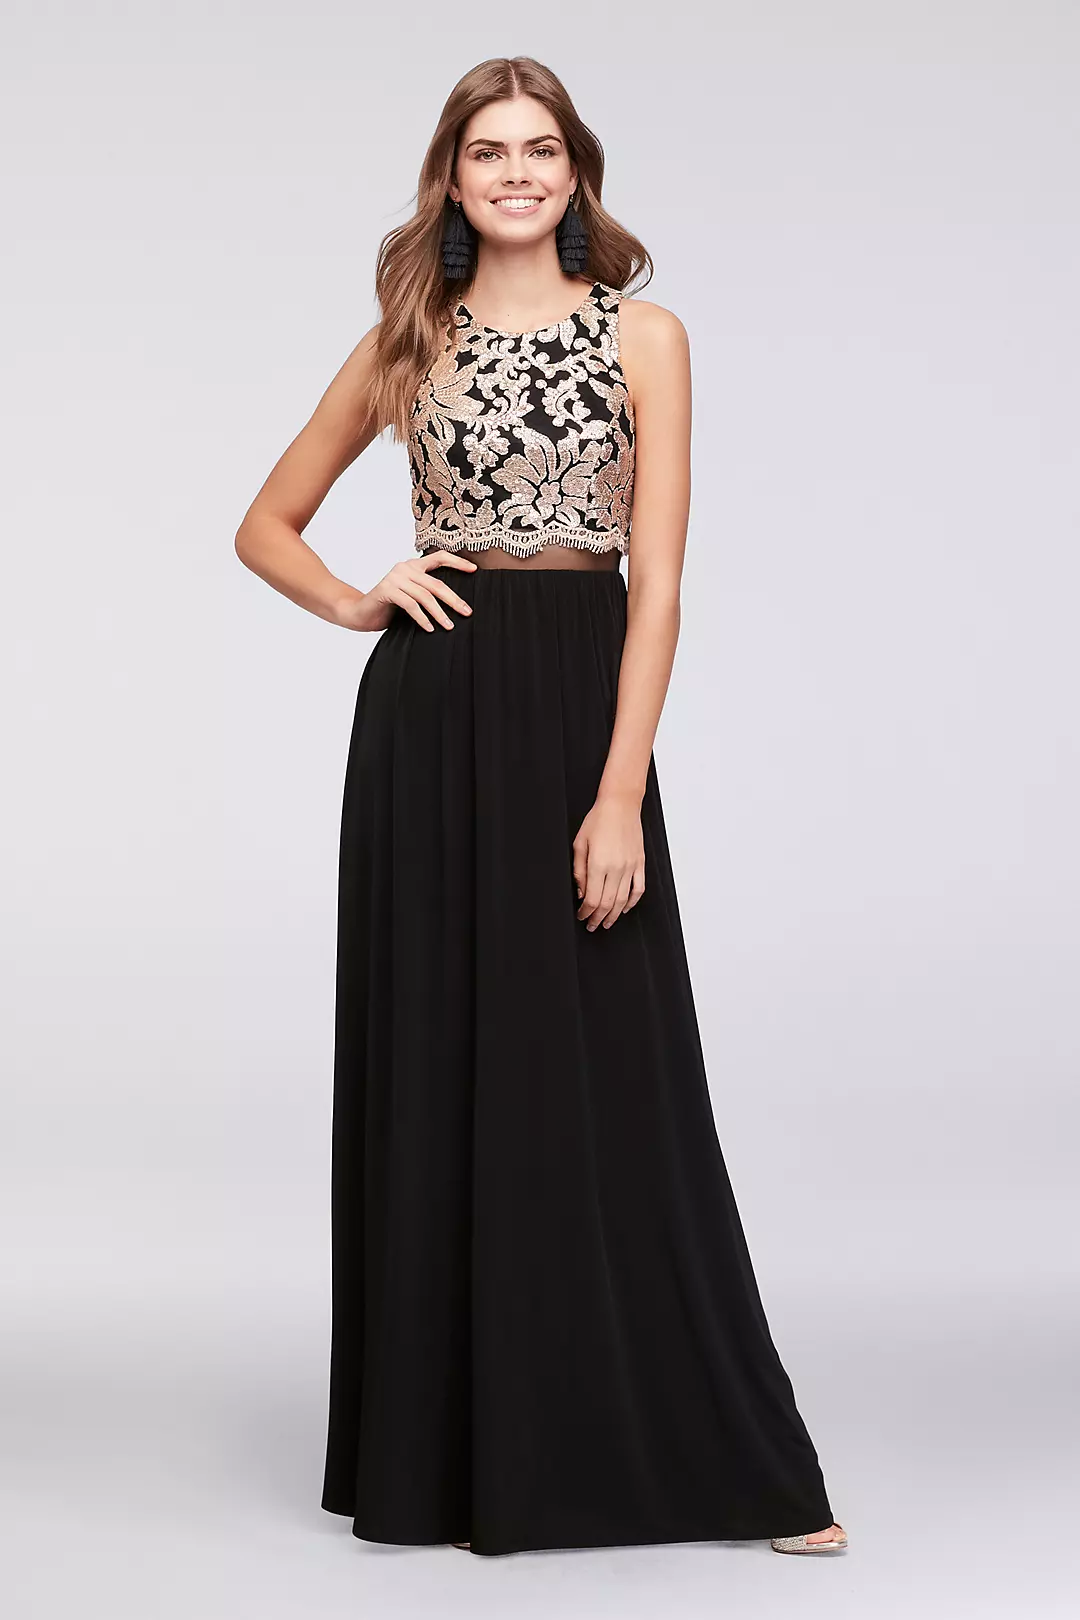 Illusion Waist Jersey Gown with Sequined Bodice Image